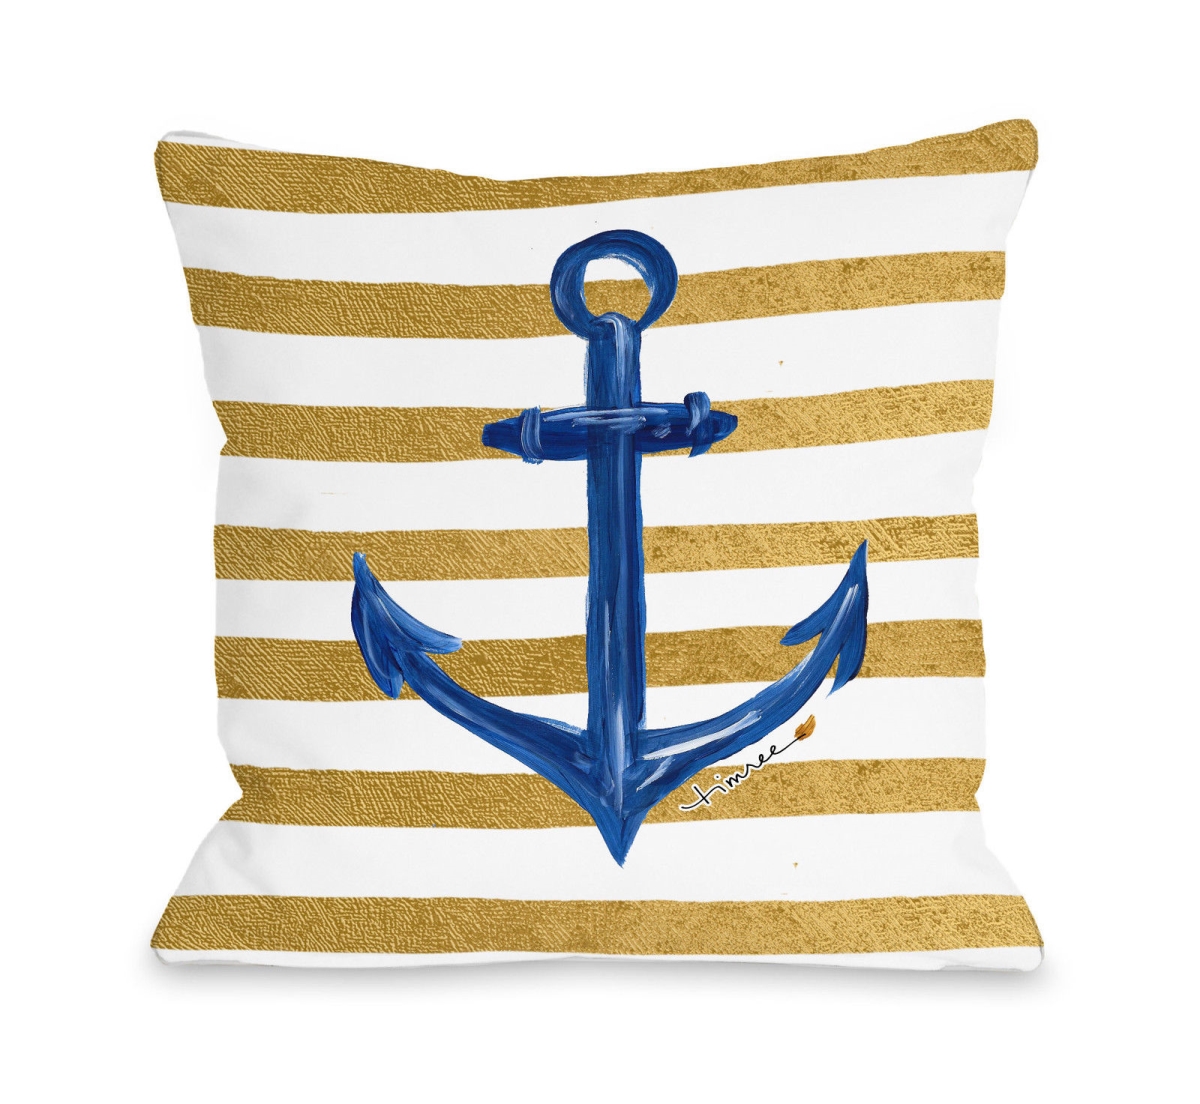 16 X 16 In. Anchor Gold Stripes Pillow By Timree - White, Gold & Blue